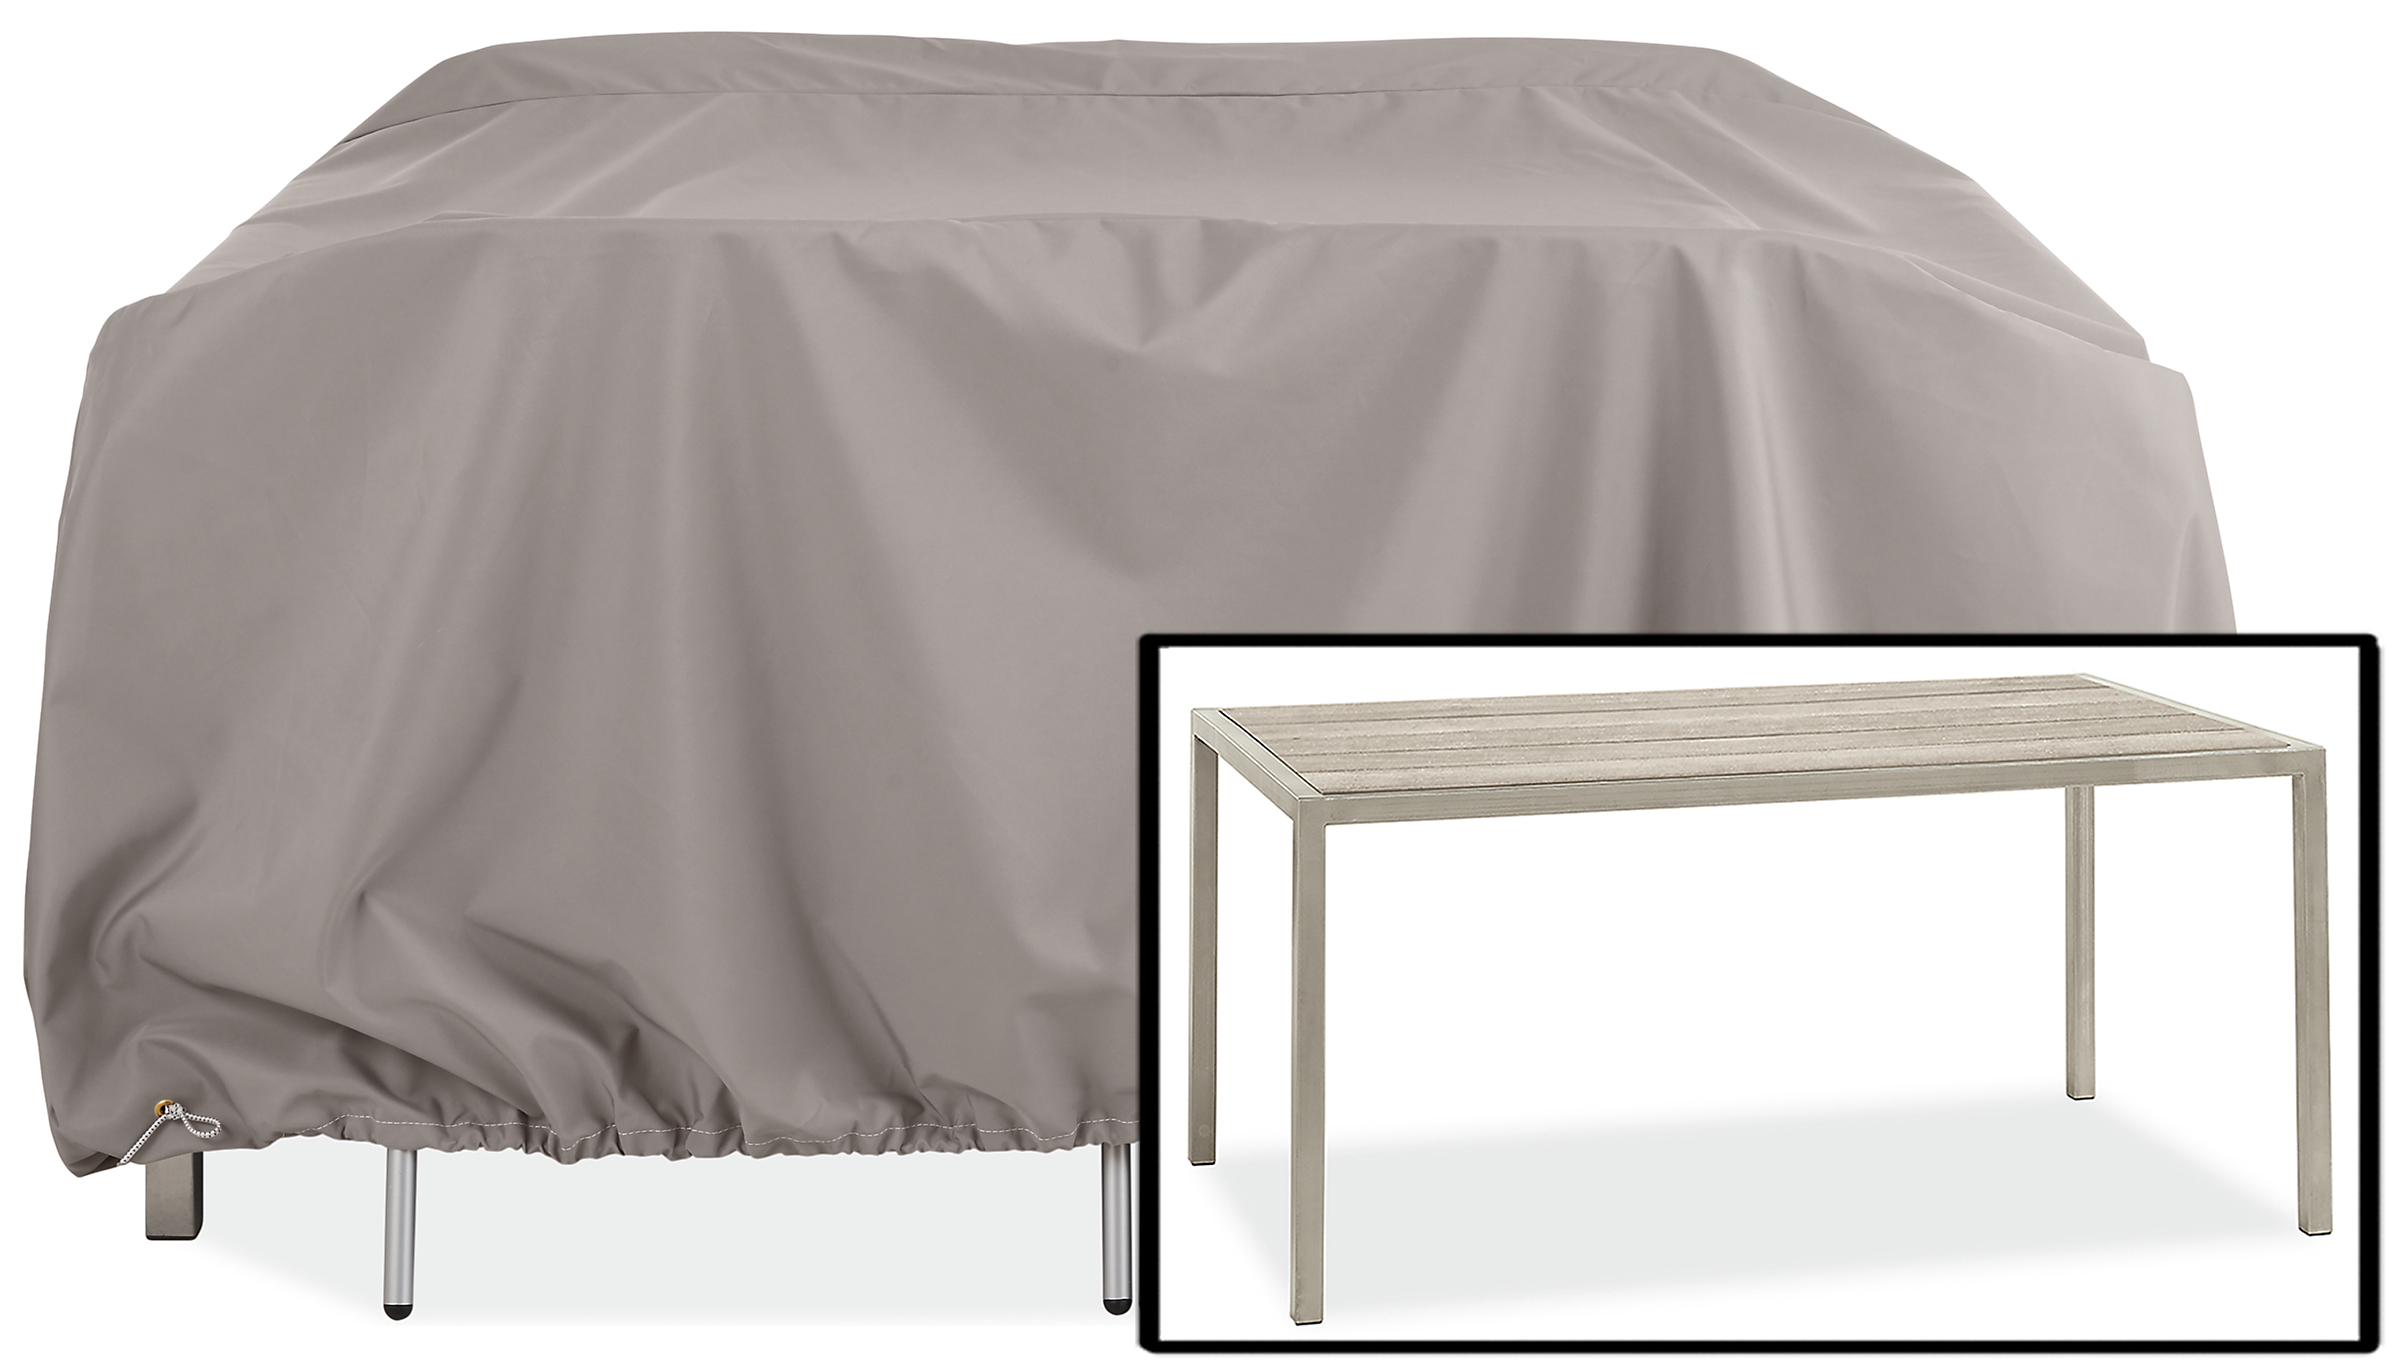 Montego Table Covers